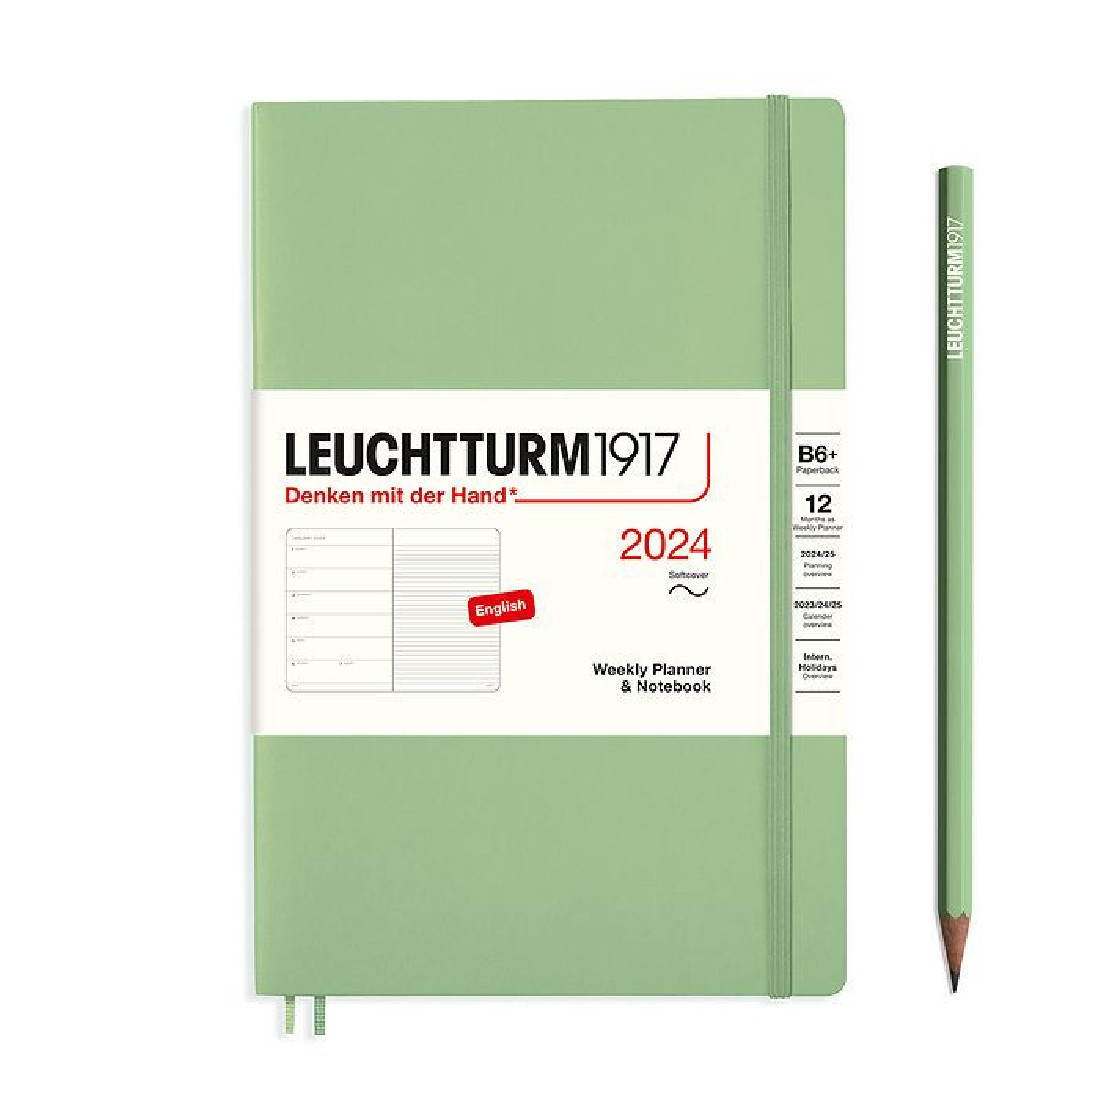 Leuchtturm 1917 Weekly Planner and Notebook 2024 Sage Paperback B6 Plus Soft Cover